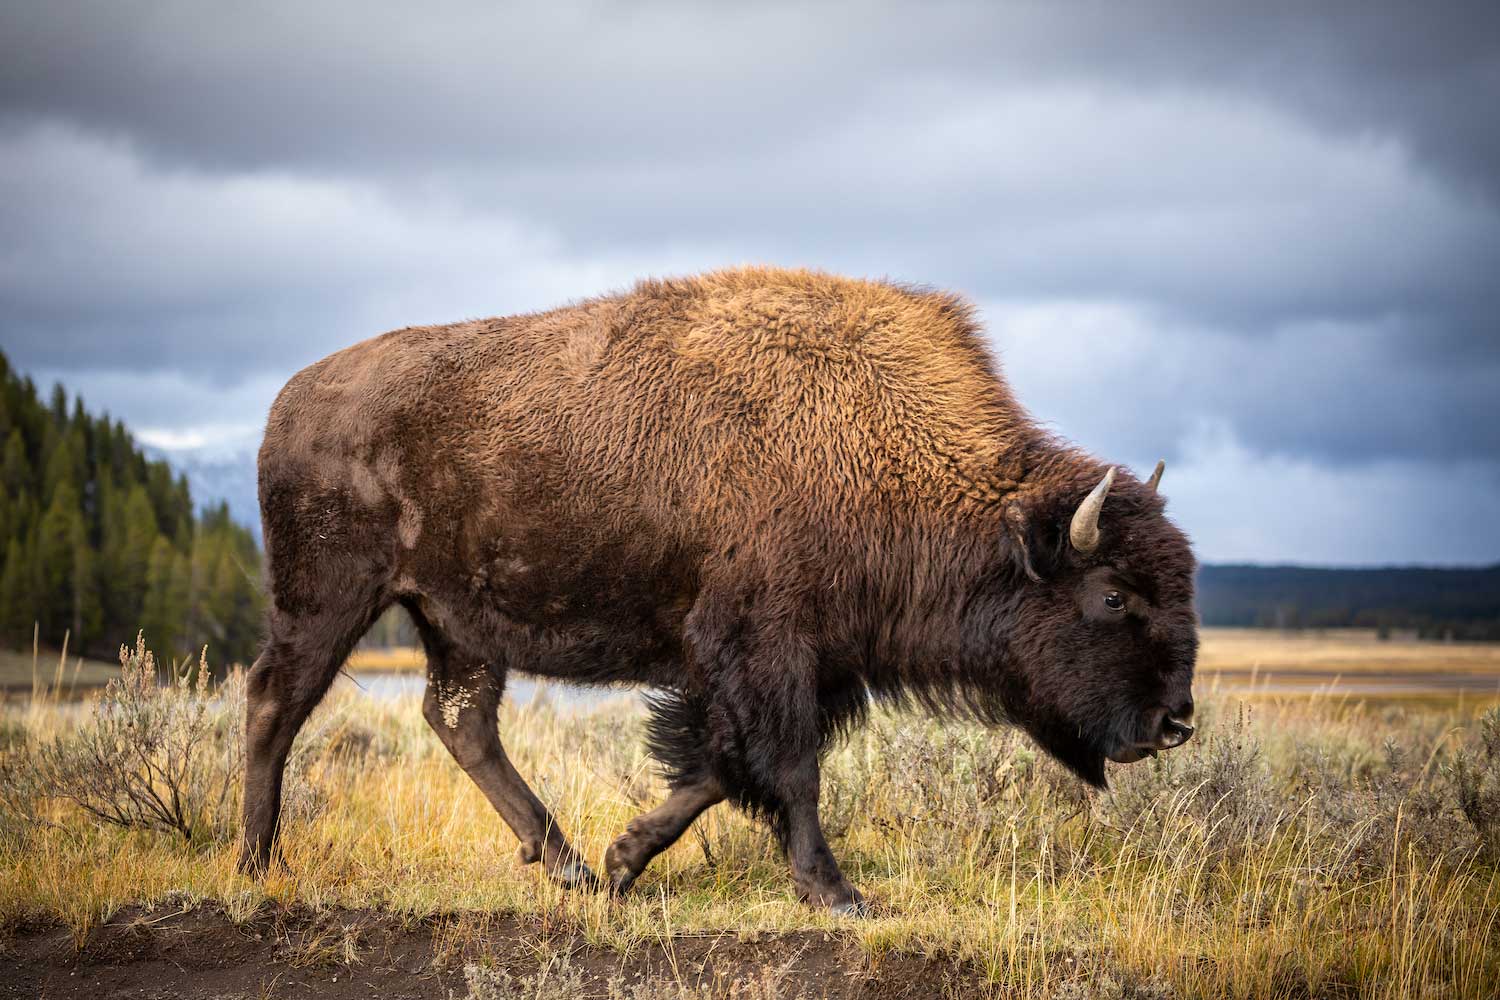 A bison grazing in grass.